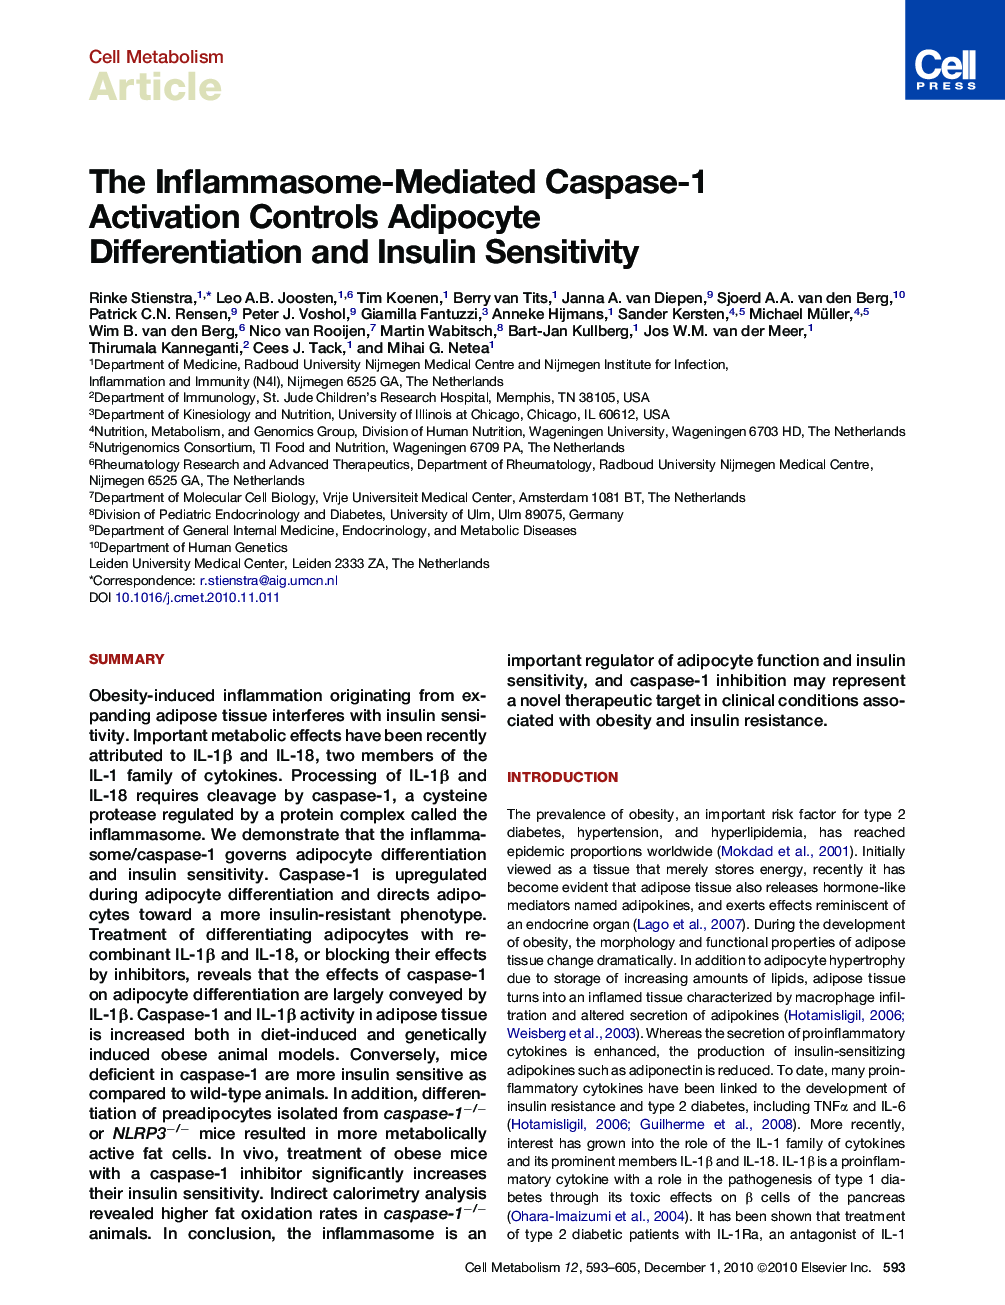 The Inflammasome-Mediated Caspase-1 Activation Controls Adipocyte Differentiation and Insulin Sensitivity